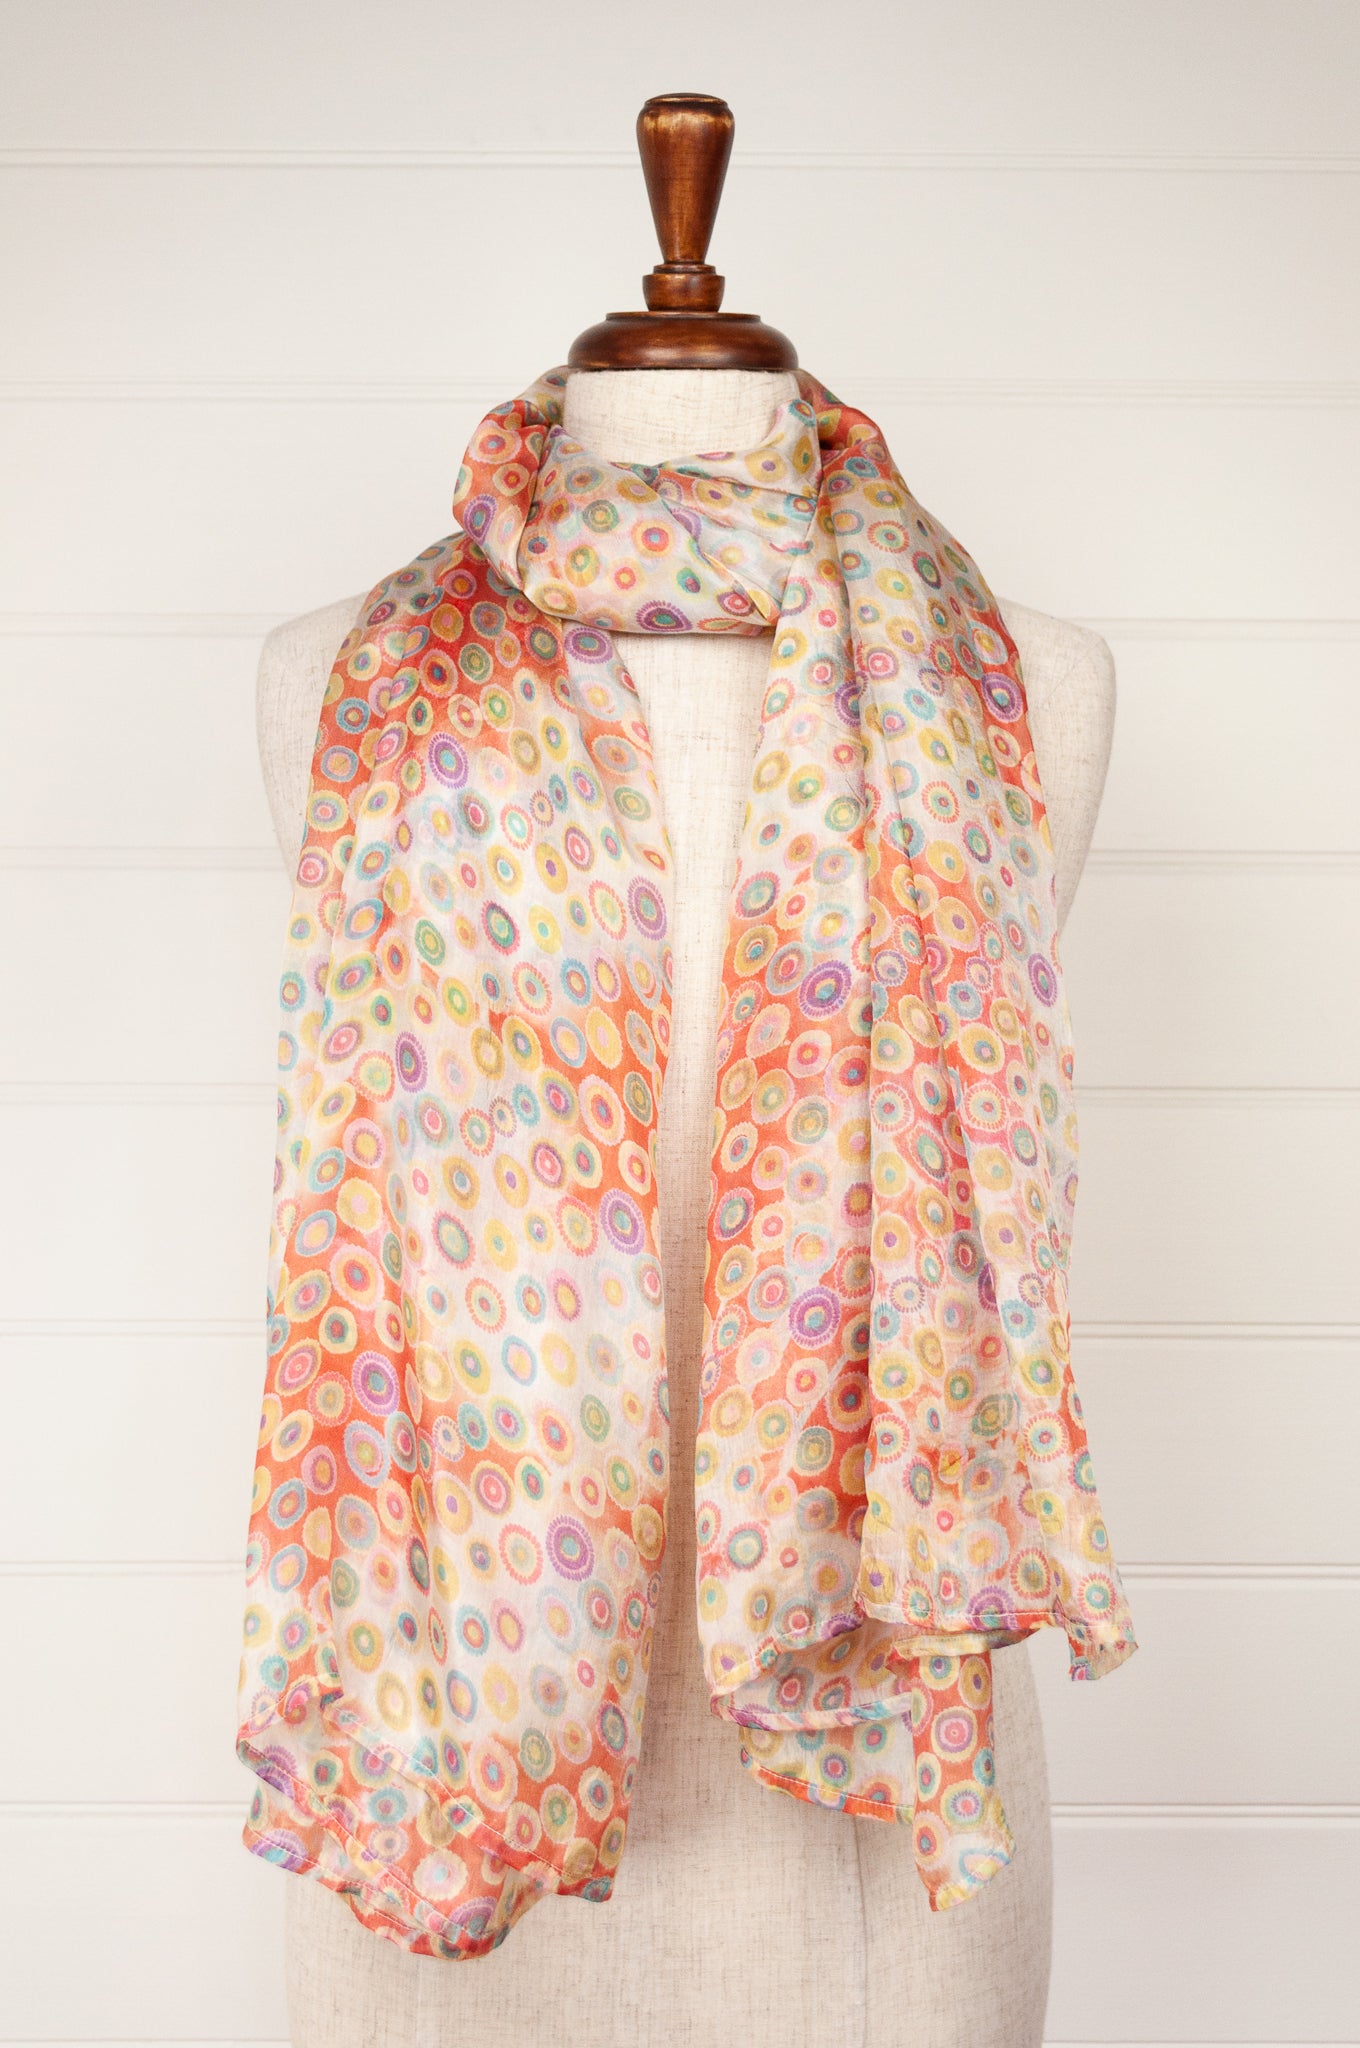 Juniper Hearth silk scarf, digital printed multi colour dots on white, with smudged diamond areas in coral red.